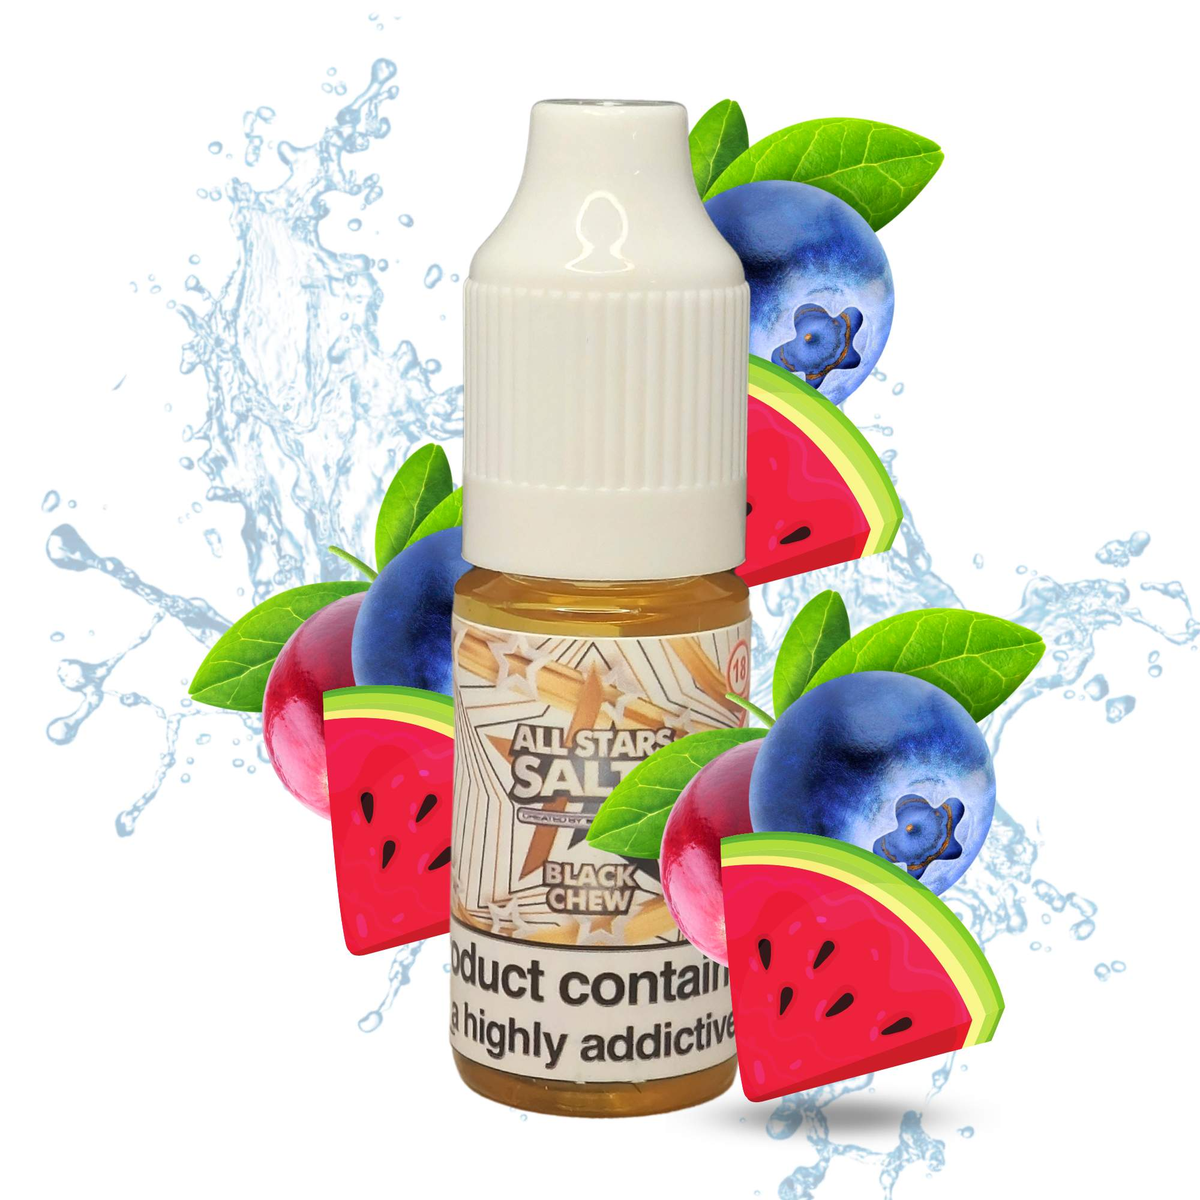 All Stars Salts from the vape brand you can trust, Electromist, . Get your taste buds ready for a flavour sensation, Black Chew. Nicotine Content: 6mg/12mg/18mg Products may contain nicotine. For over 18s Only ejuice, vape pen, eliquid, e cigarette, 10ml, vaping, cloud, PG, VG, 60/40, vape liquid, Flavour, TPD